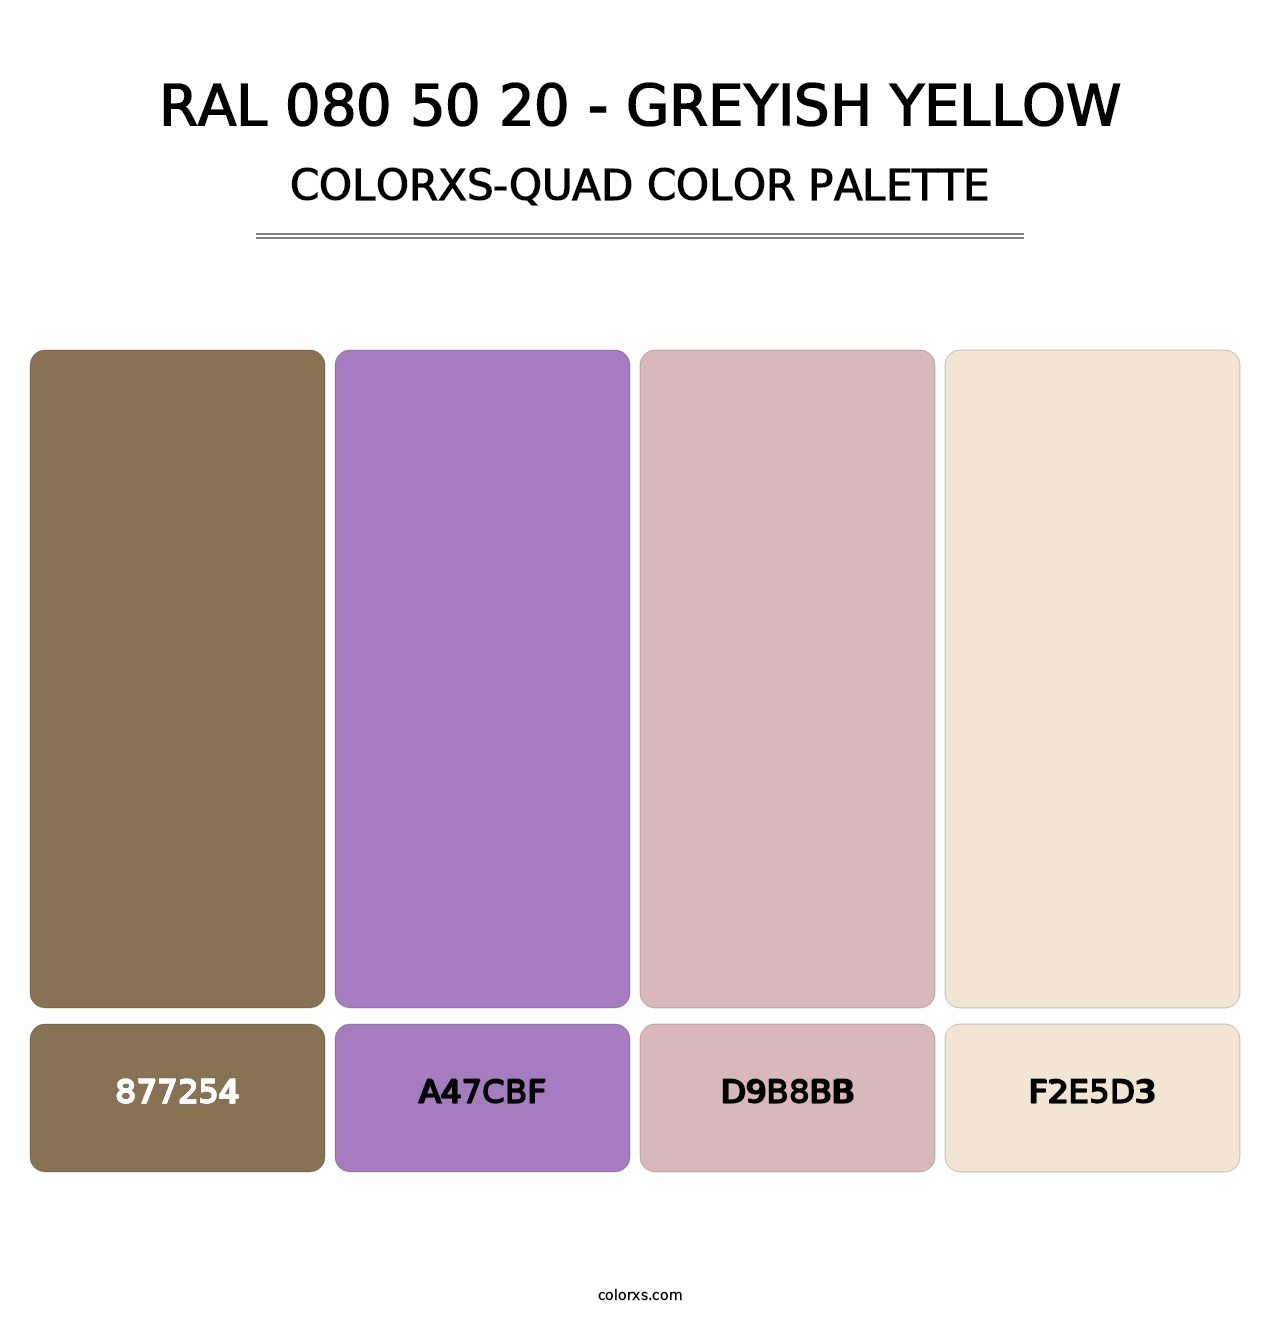 RAL 080 50 20 - Greyish Yellow - Colorxs Quad Palette